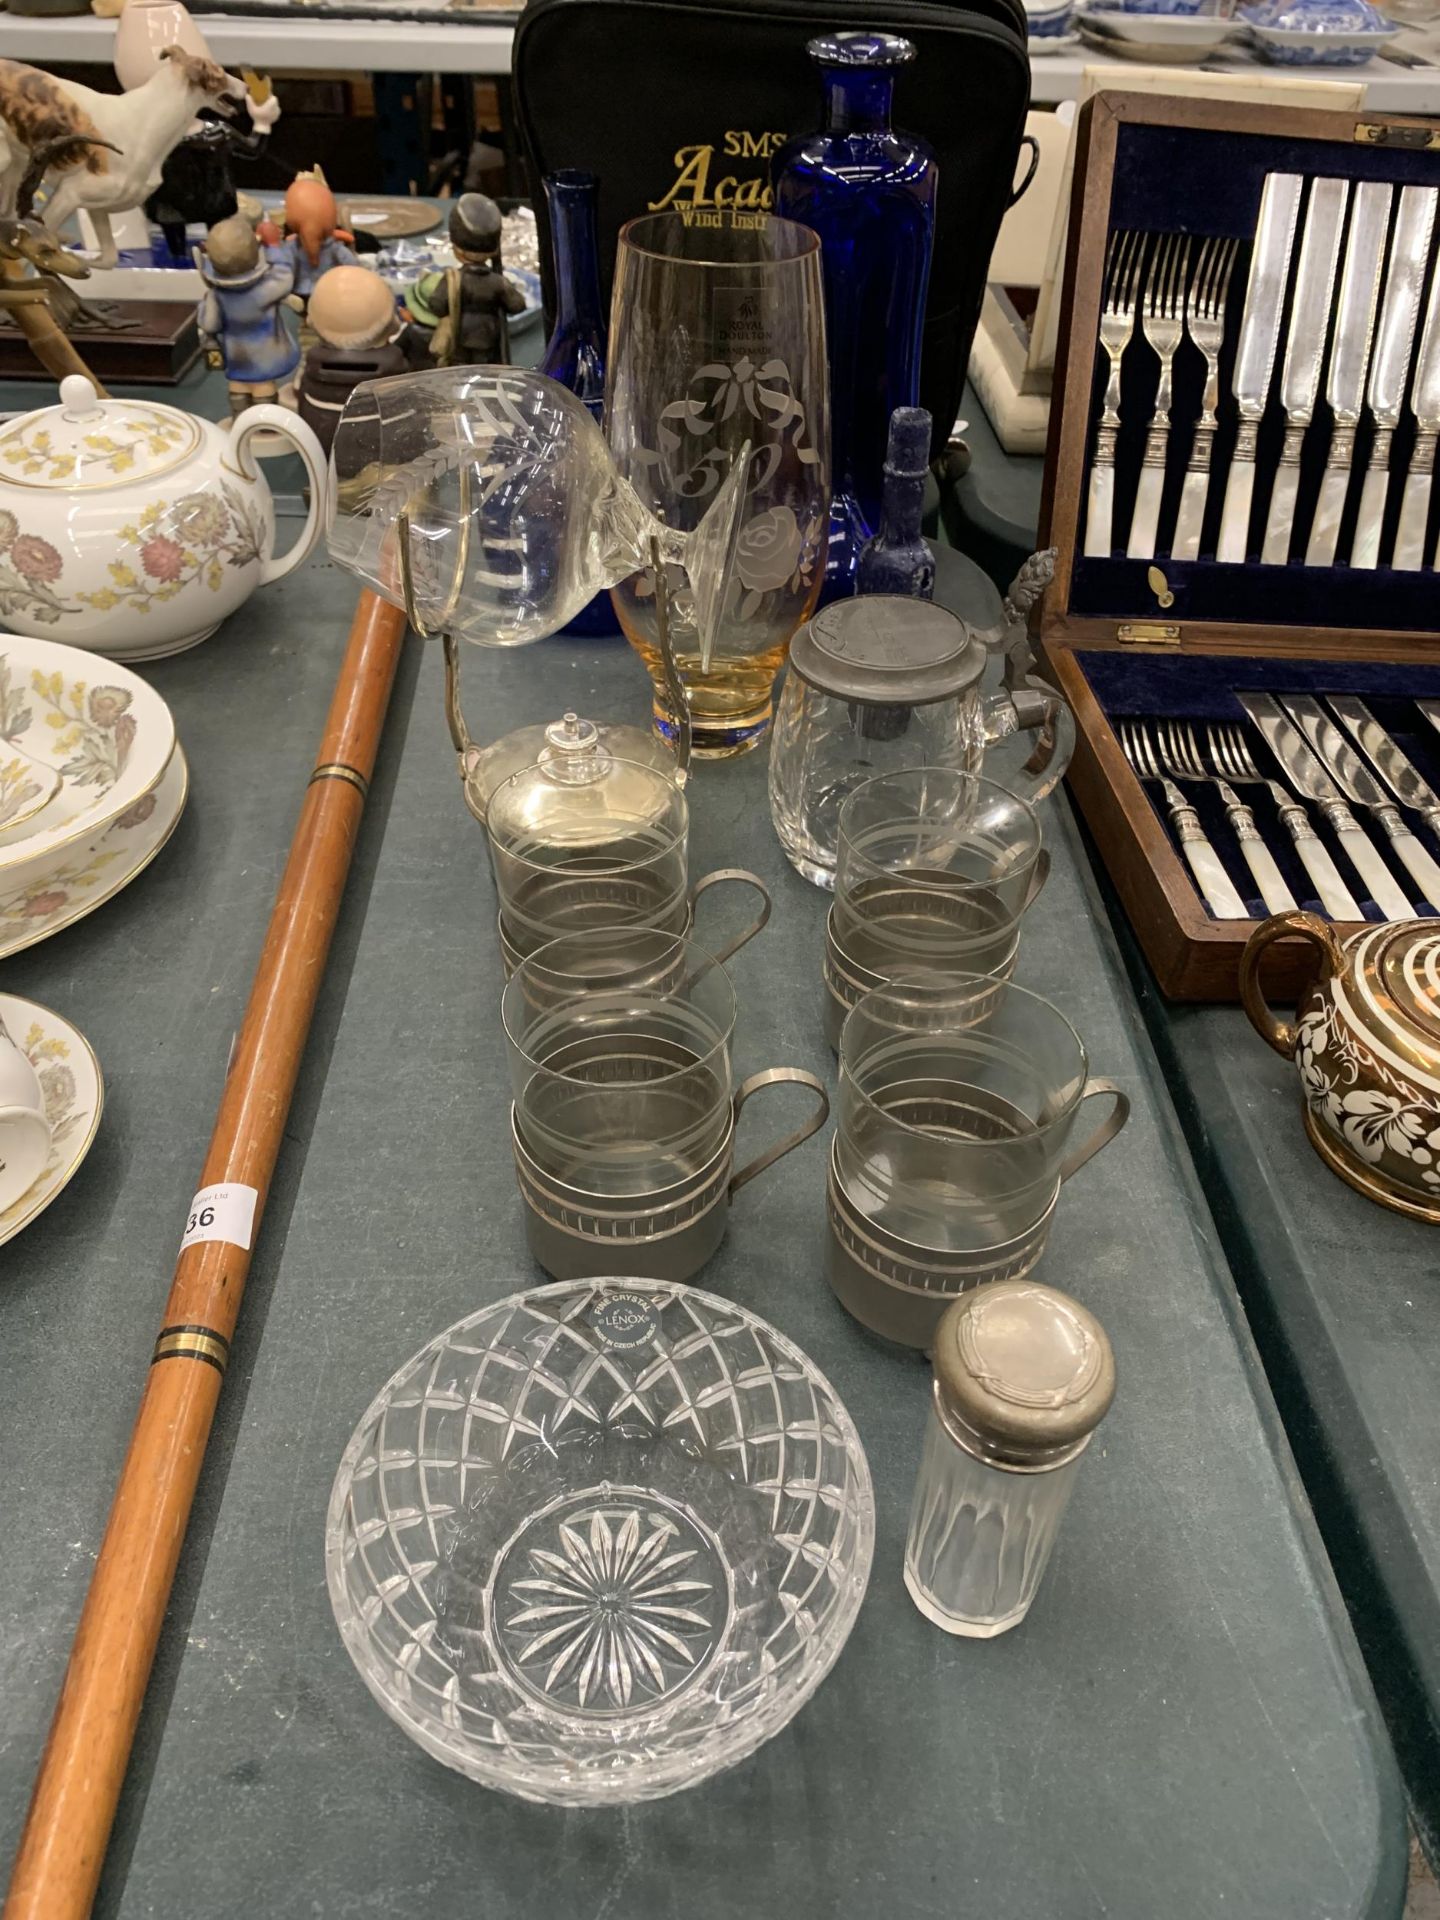 A QUANTITY OF GLASSWARE TO INCLUDE A BRANDY GLASS WARMER WITH GLASS, BLUE BOTTLES, A ROYAL